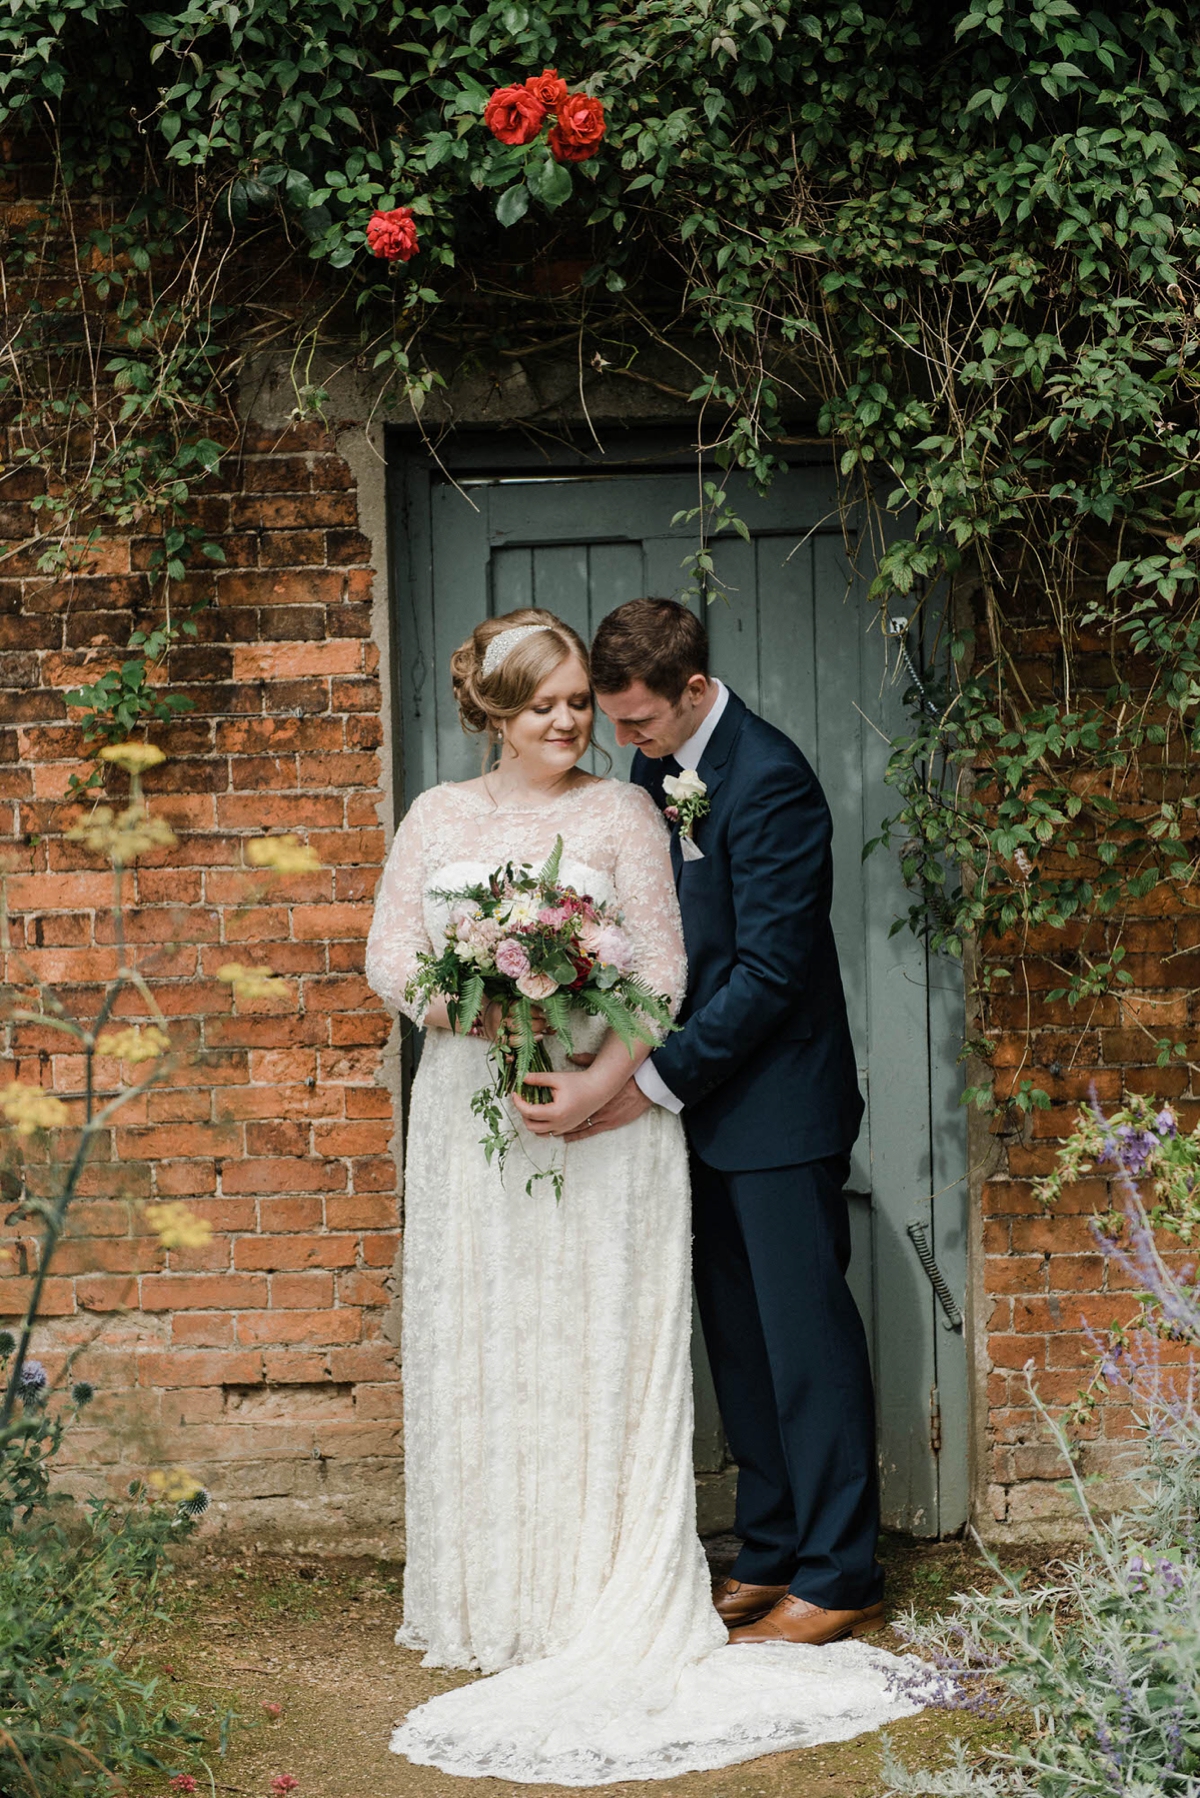 53 A bride who made her own dress for her elegant garden party wedding